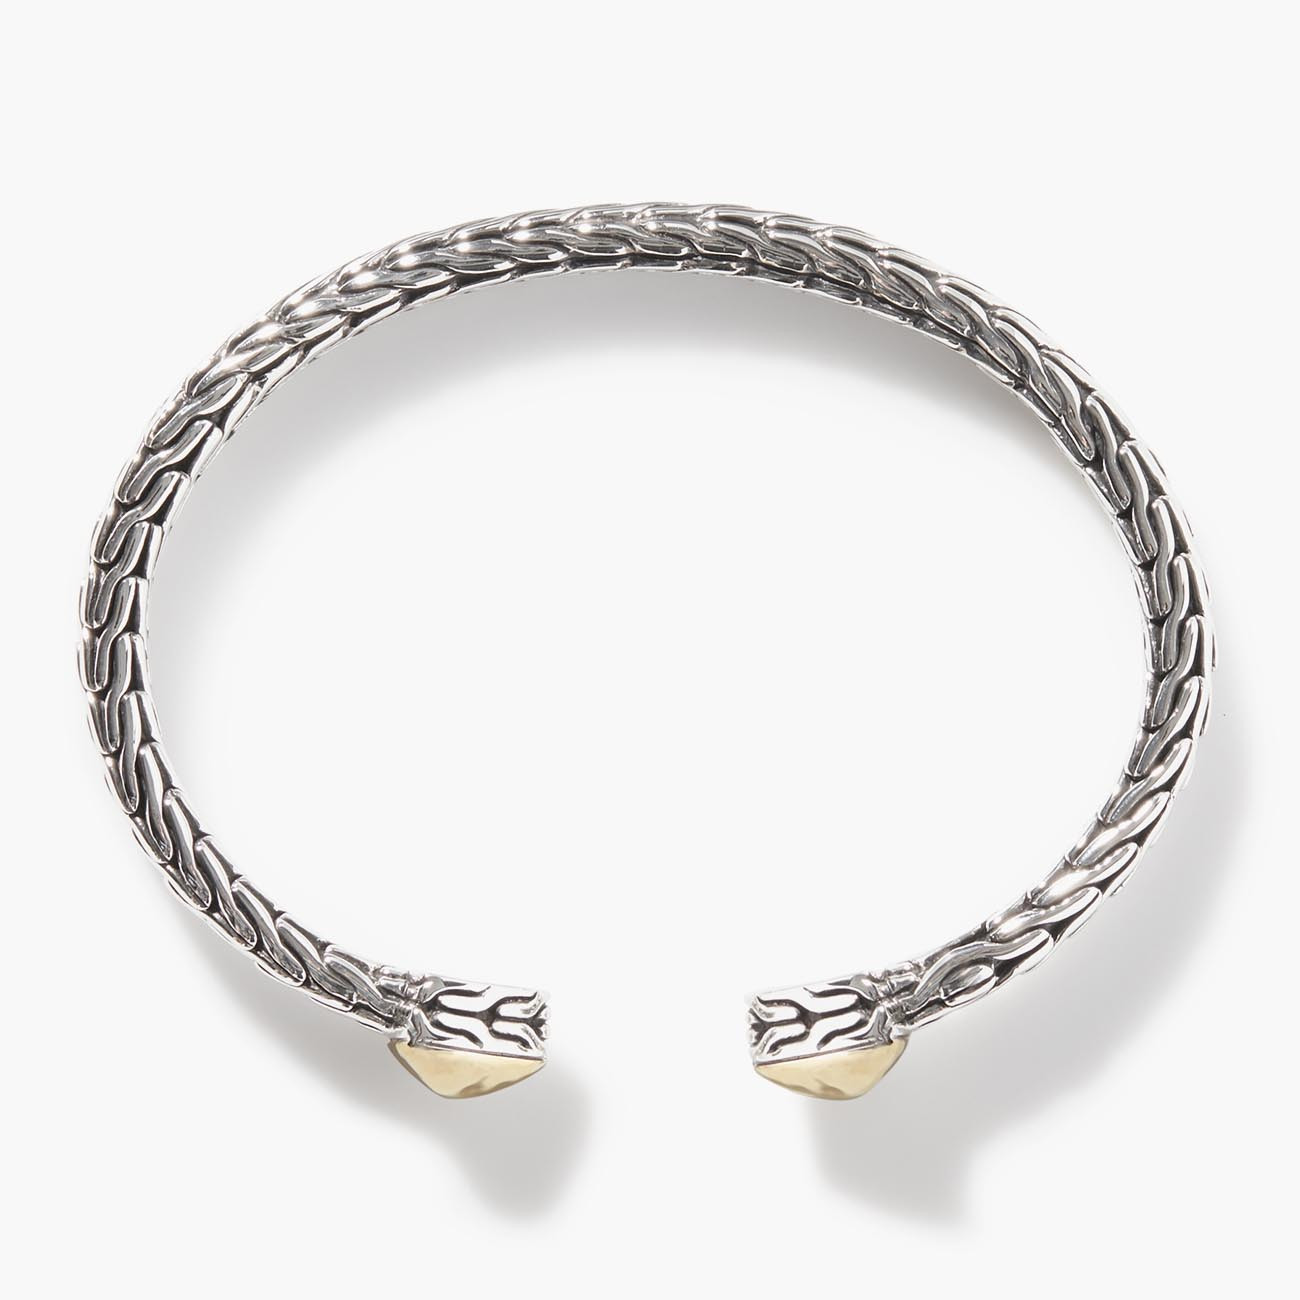 John Hardy Classic Chain Silver and Gold Cuff Bracelet side view